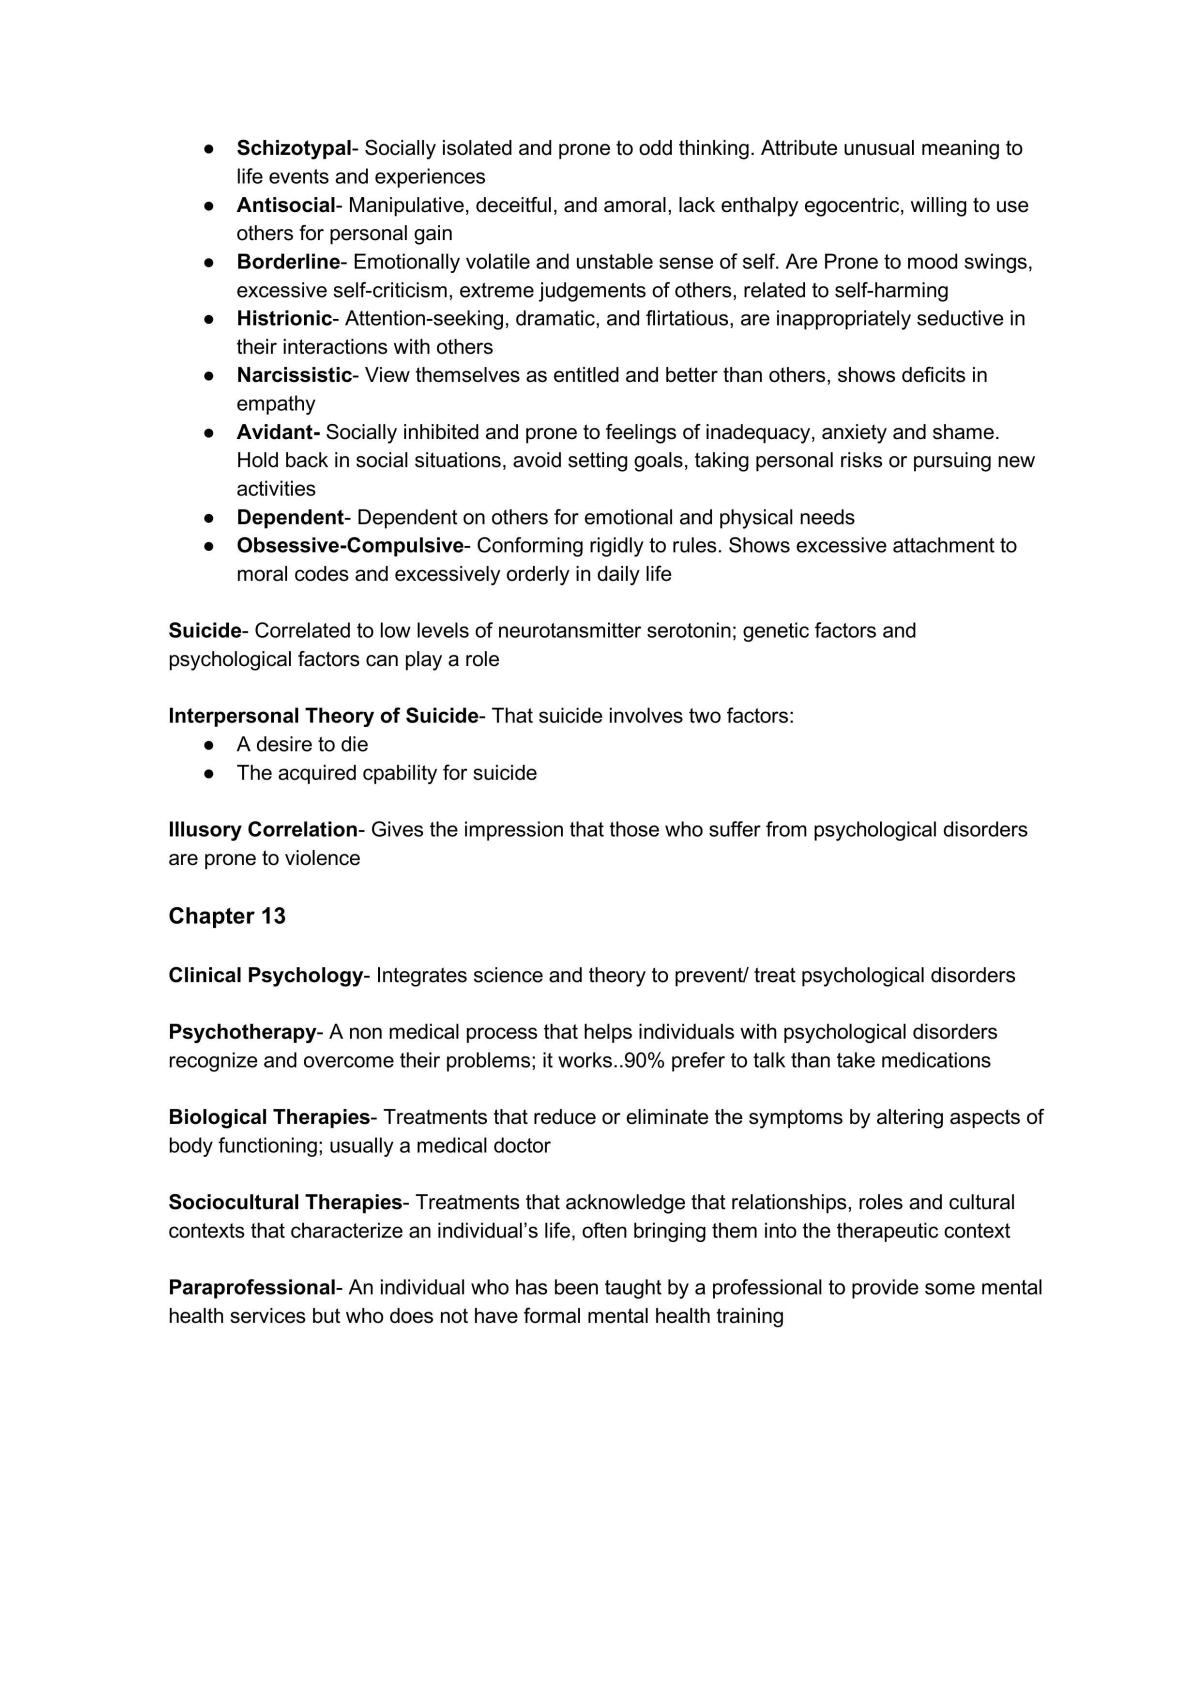 Elementary Psychology Finals Study Guide - Page 20